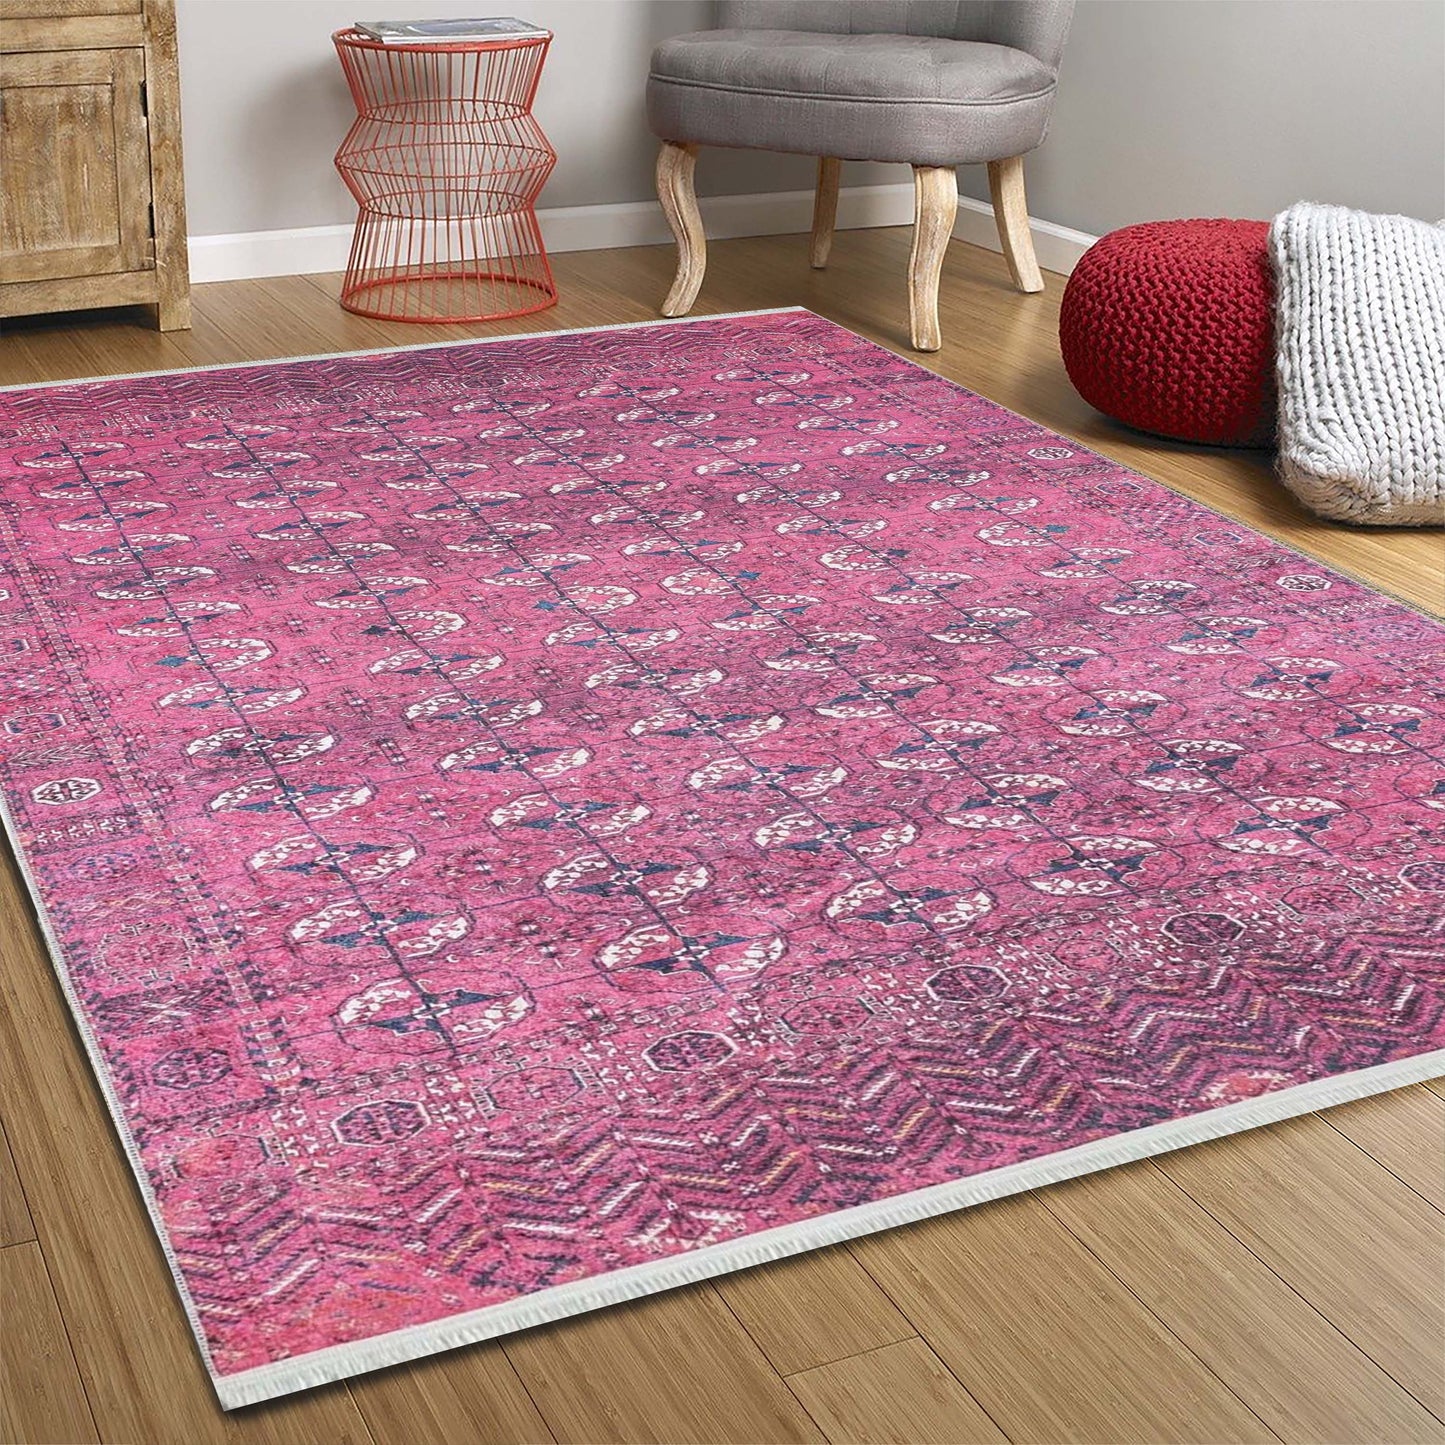 2x3 Afghan Rug Hot Pink Small Area Rugs 3x5 4x6 Oriental Traditional Antique Vintage Tapis for Kitchen Bathroom Bedside Entryway Laundry